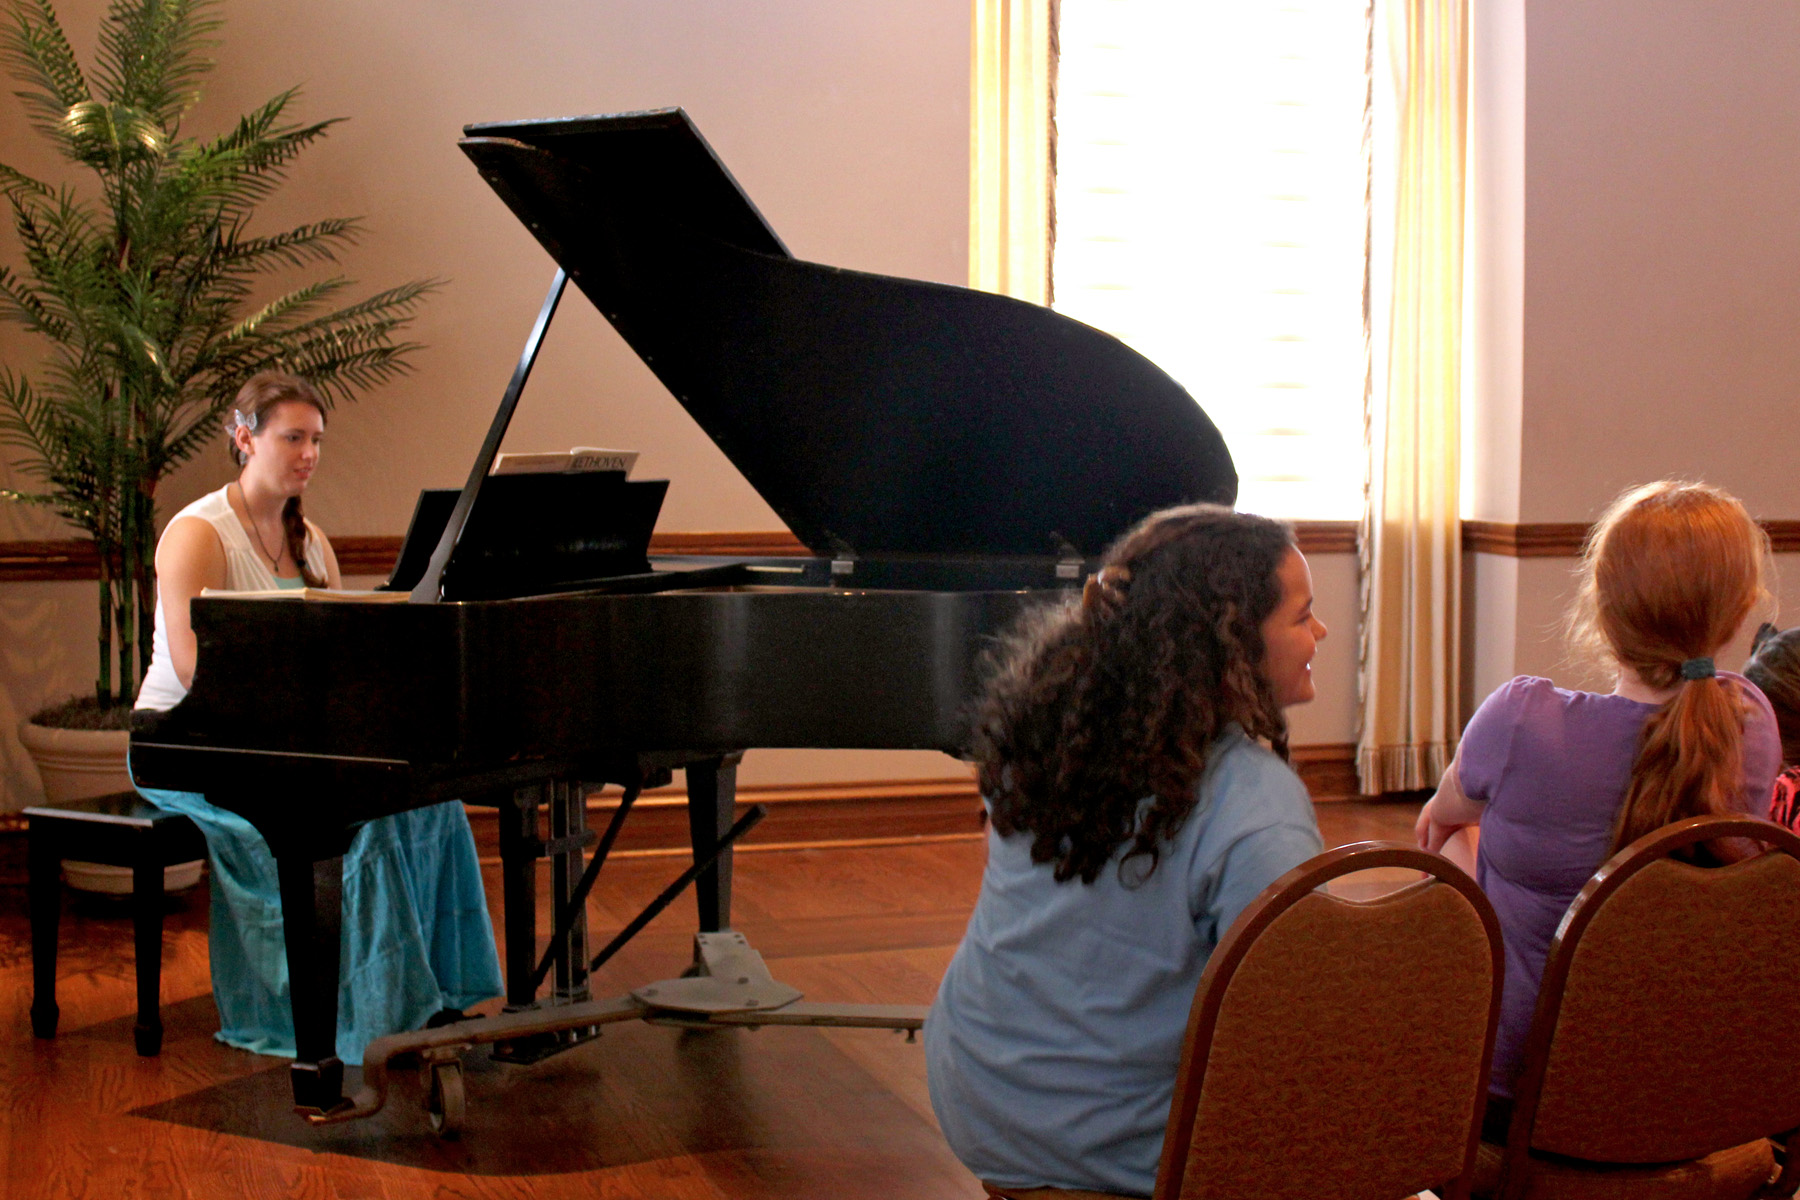 OU music performance major Angela Marshall played adaptations of Indian songs on piano. Photo by Jen Rickard.